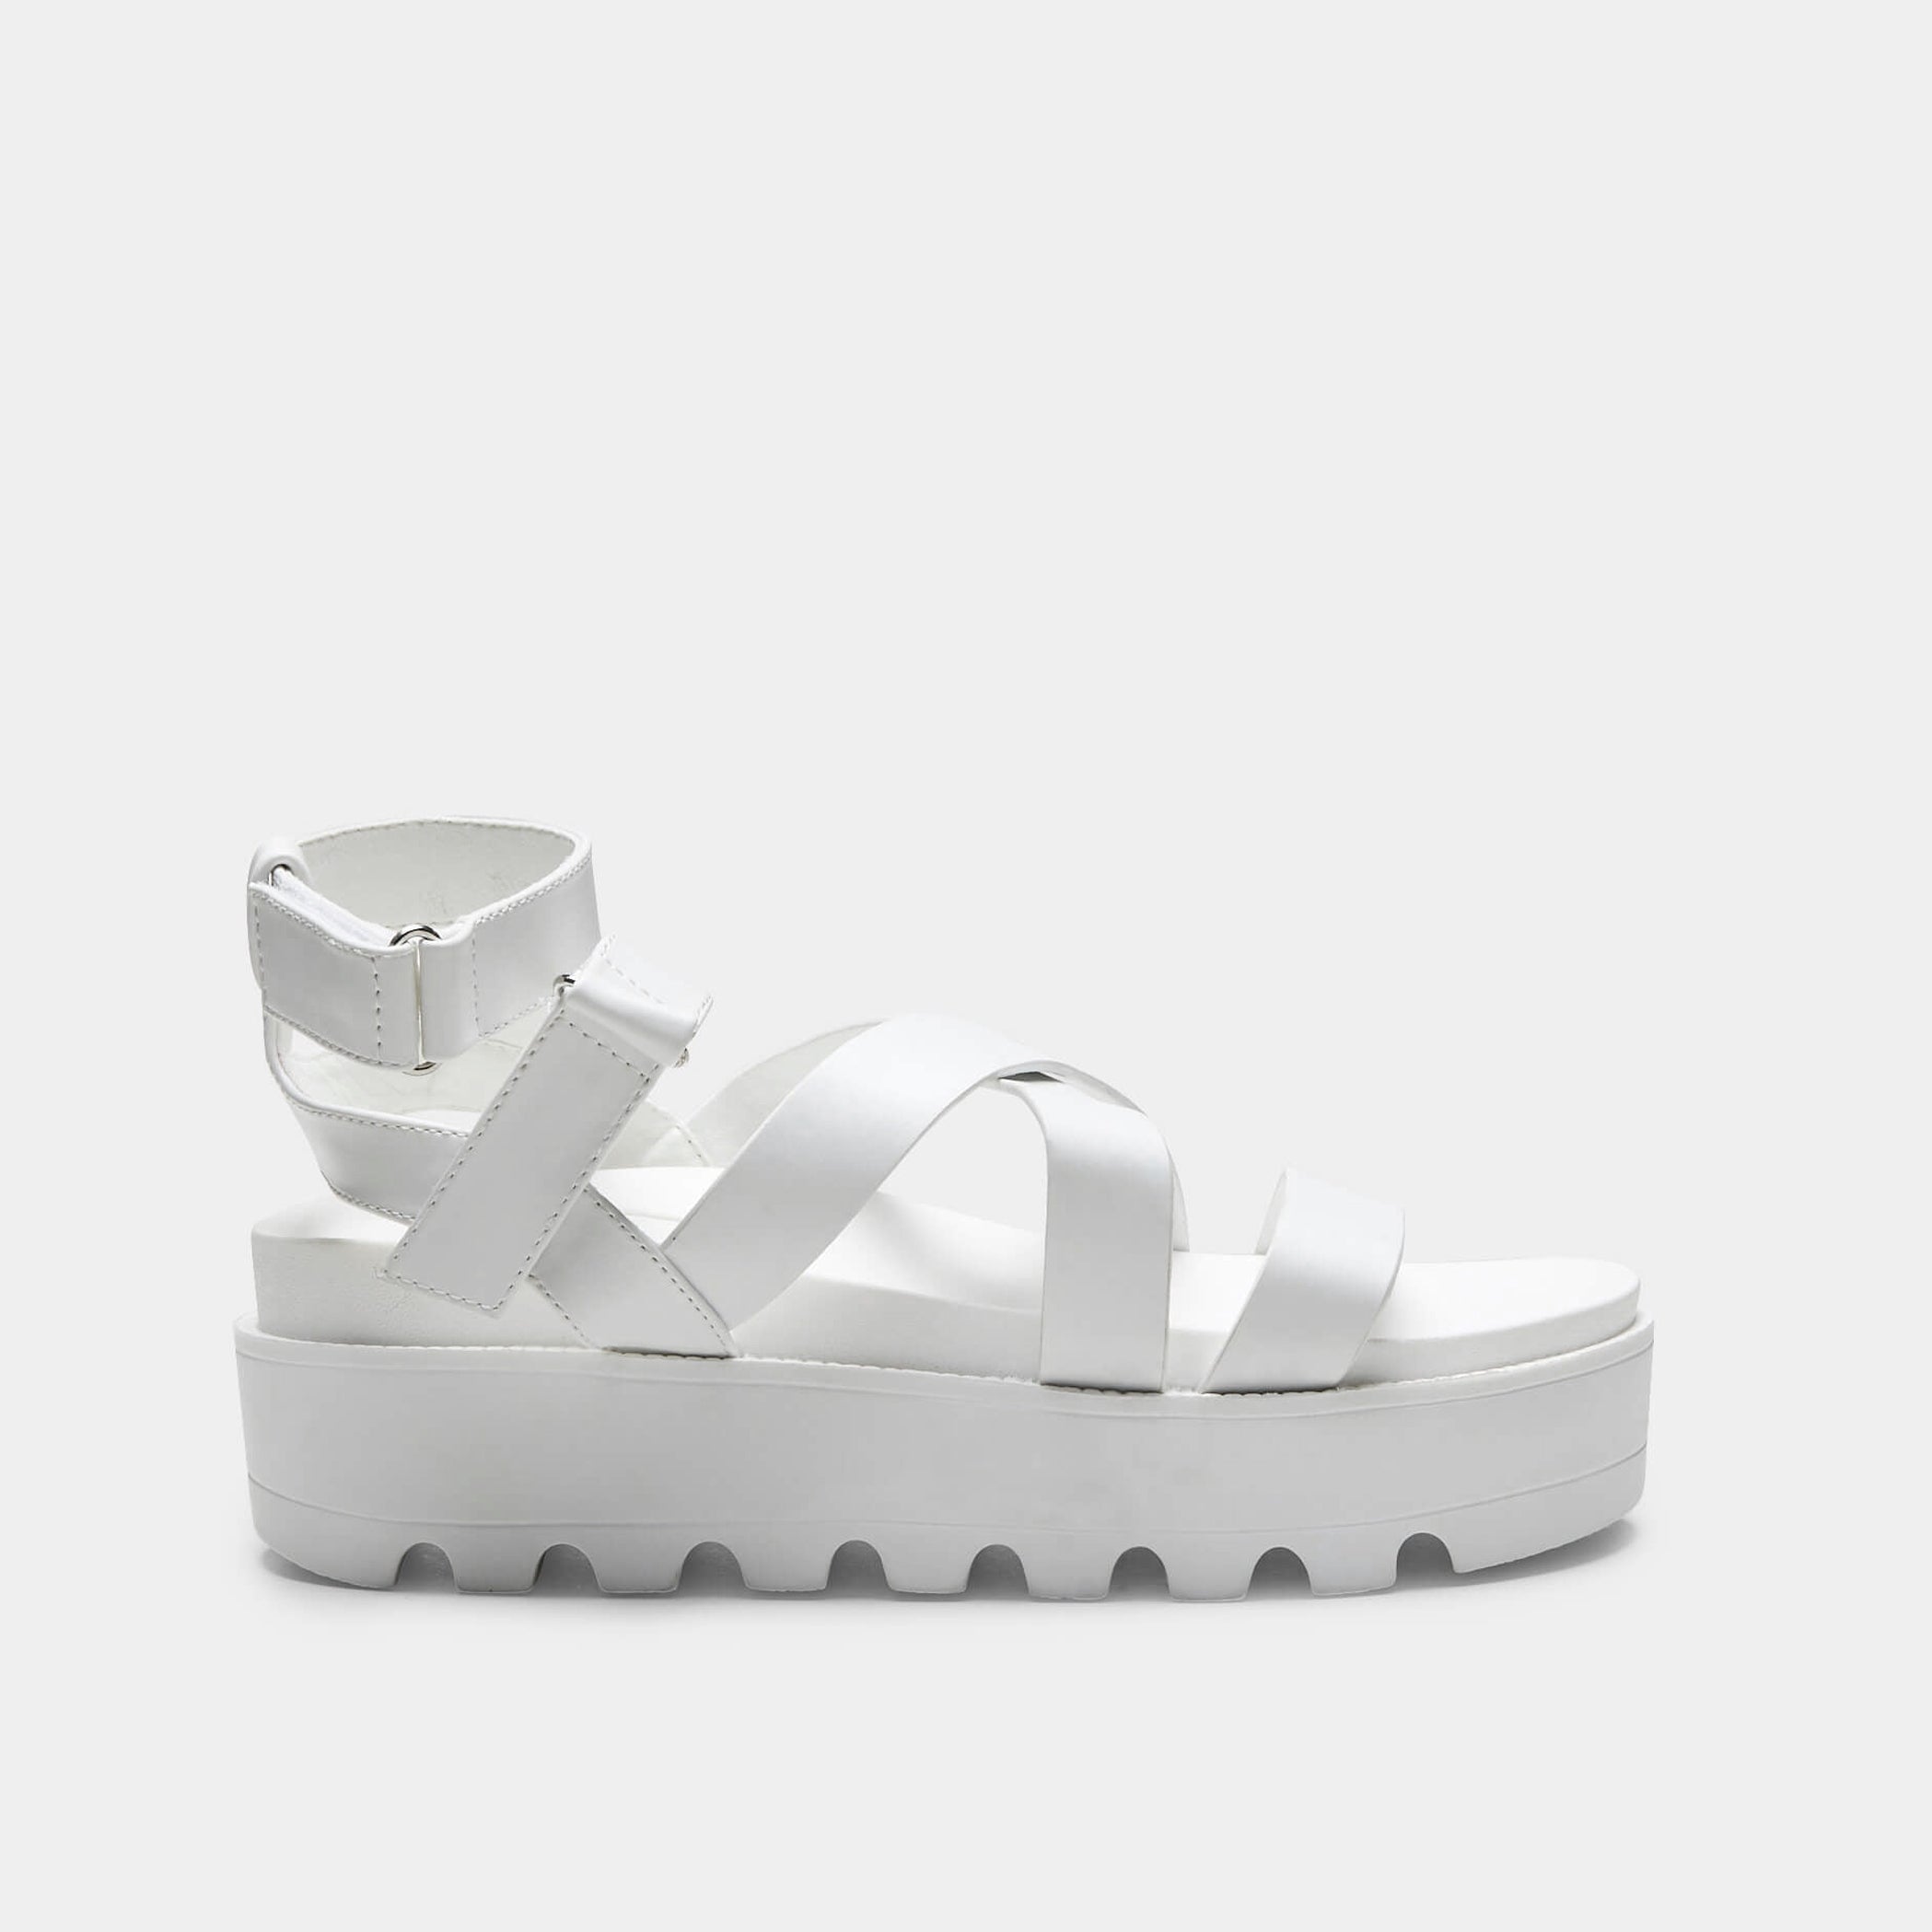 READYSALTED Women's Cleated Chunky Platform Sandals in Open Toe Ankle Strap  Block Heel(White,Size 9) - Walmart.com